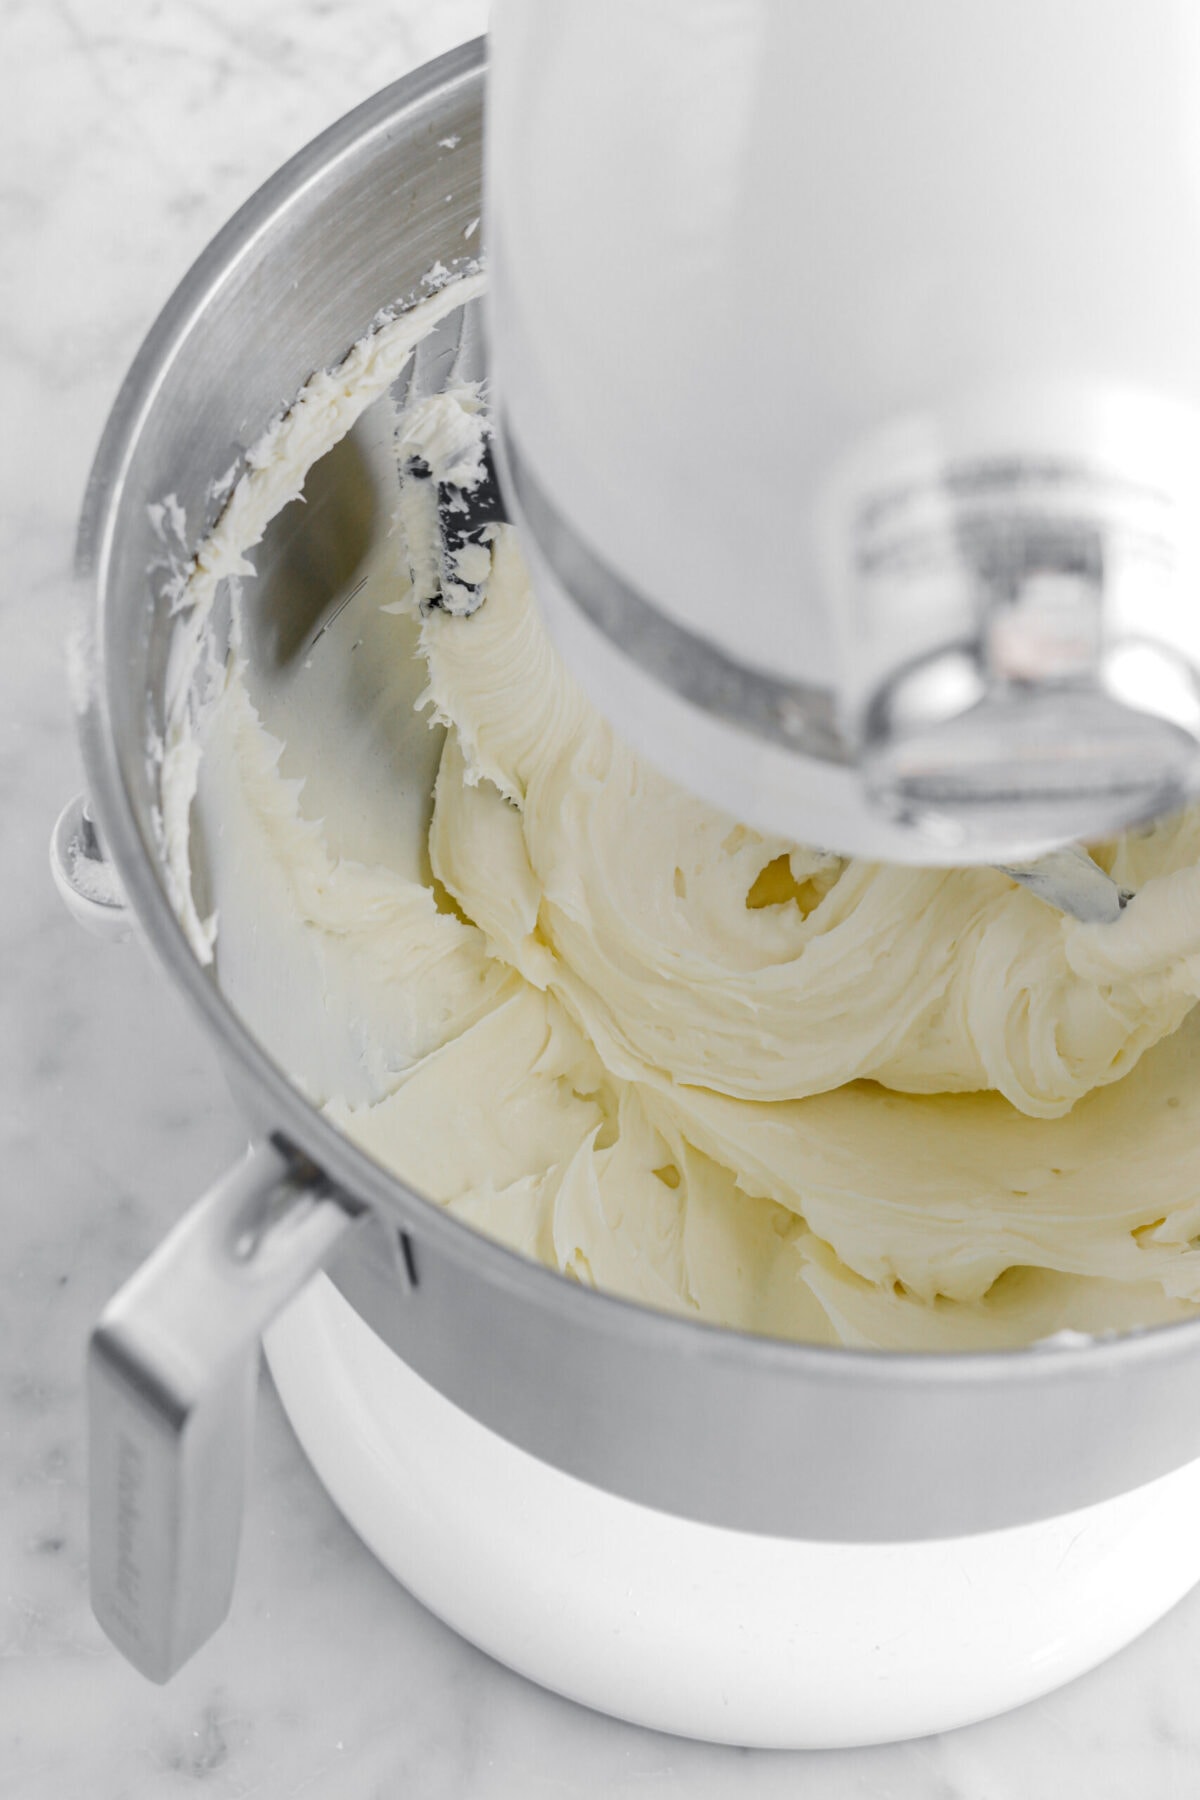 sugar and cream cheese mixture in stand mixer.